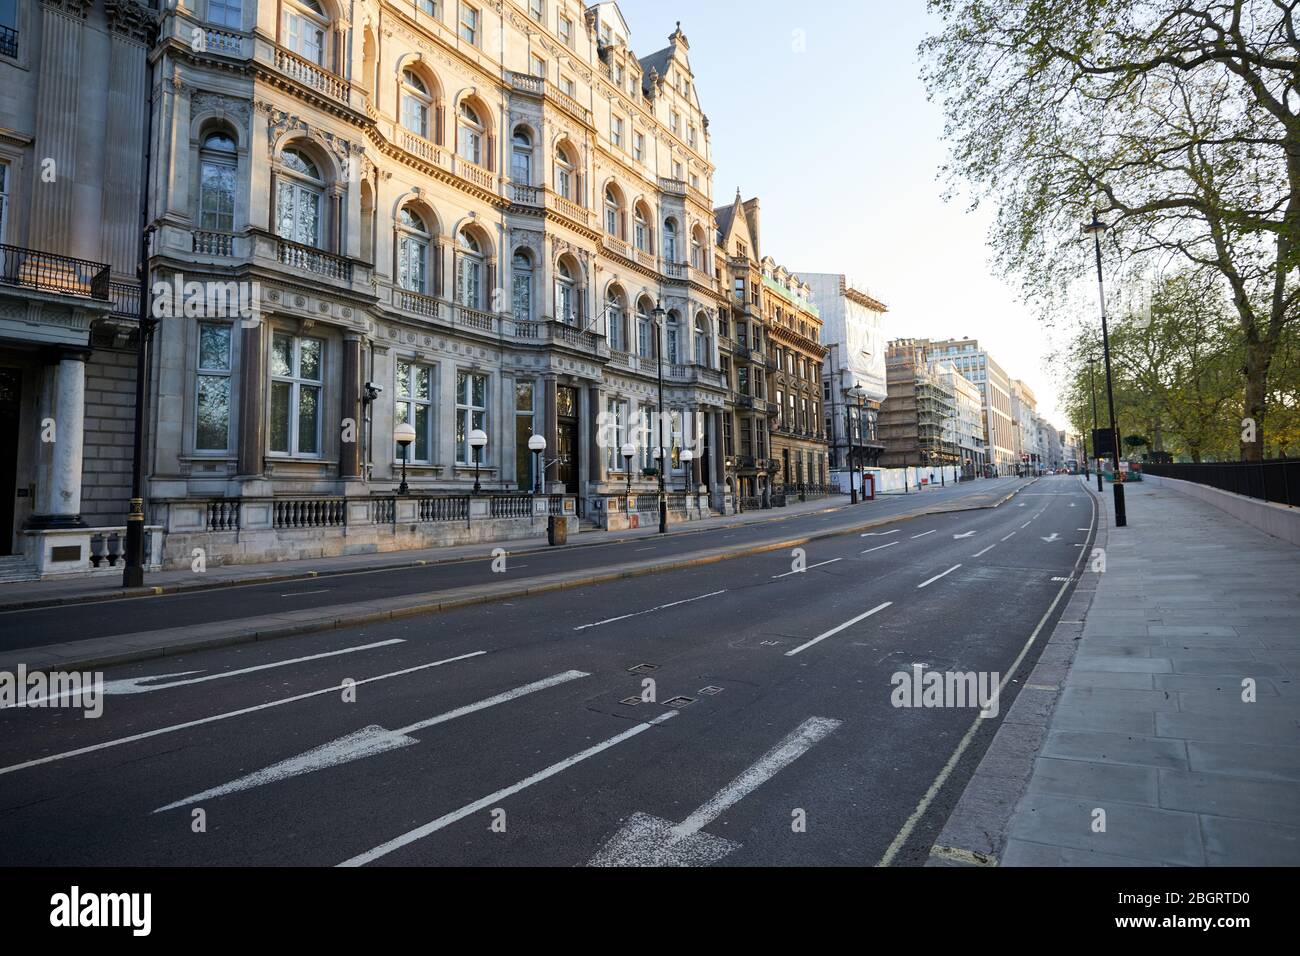 London, U.K. - 22 Apr 2020: A deserted Piccadilly during the coronavirus lockdown. It is normally a busy major thoroughfare leading to the heart of London. Stock Photo